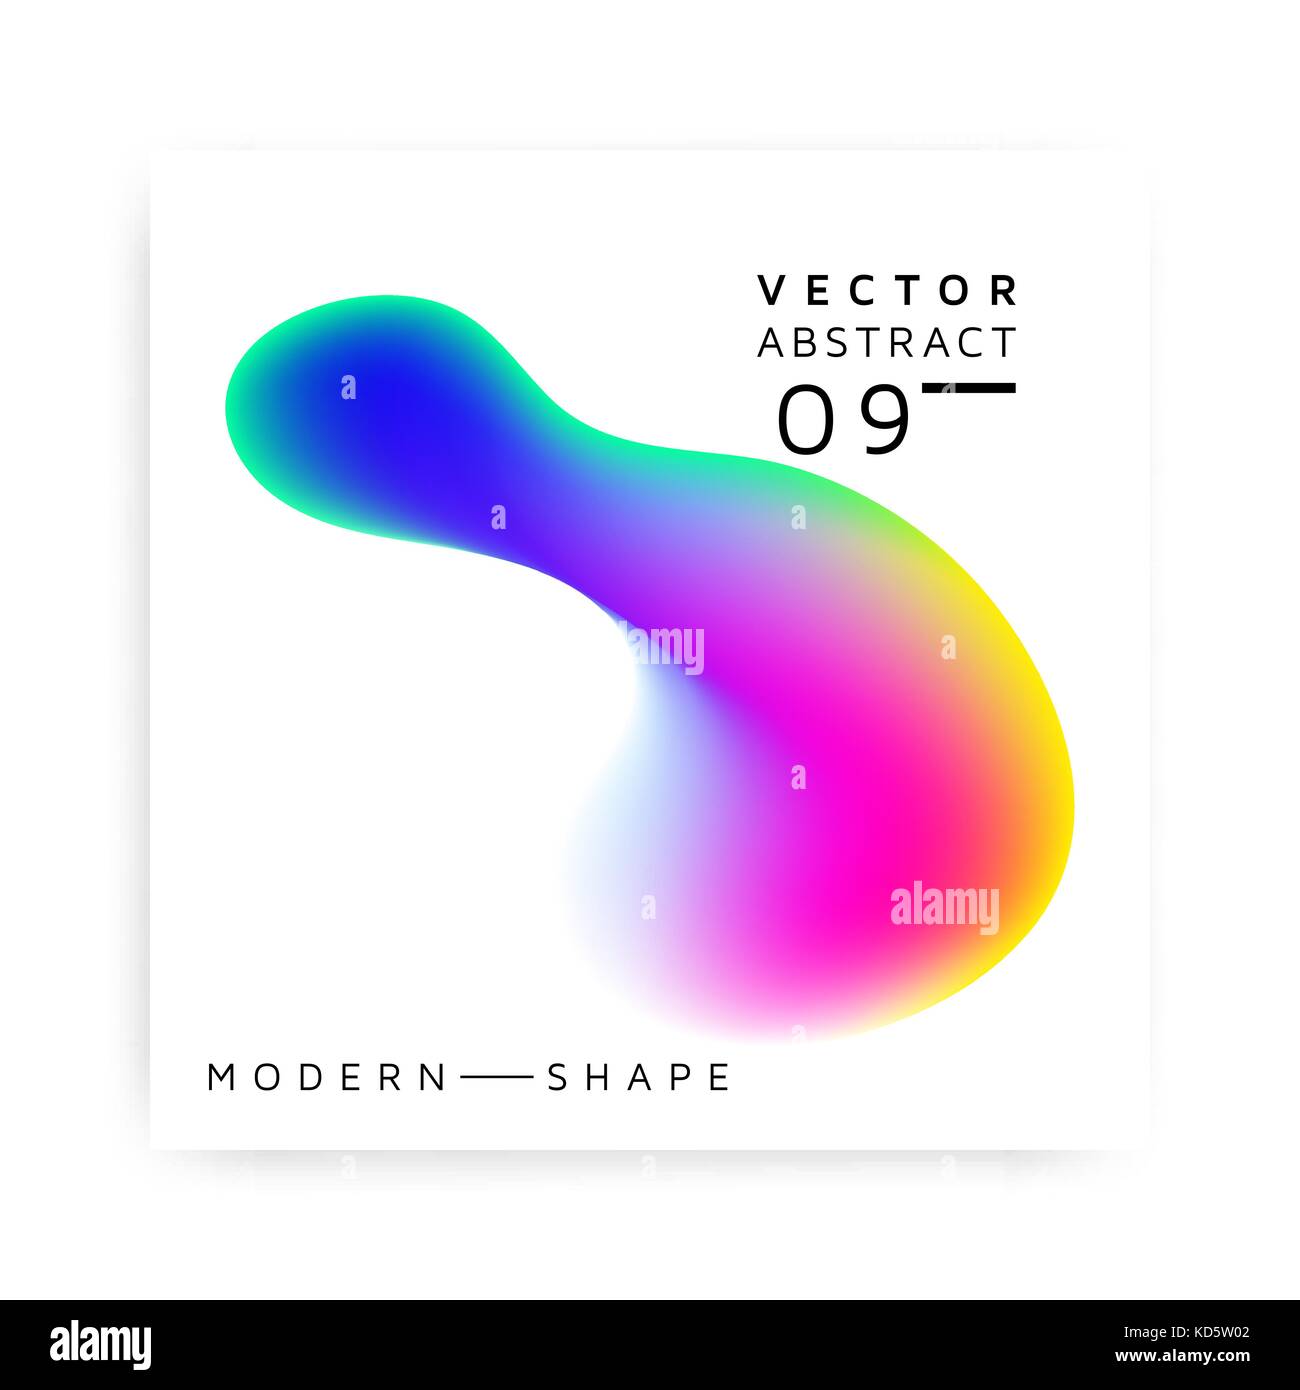 Abstract vector moderne und farbenfrohe Form Stock Vektor